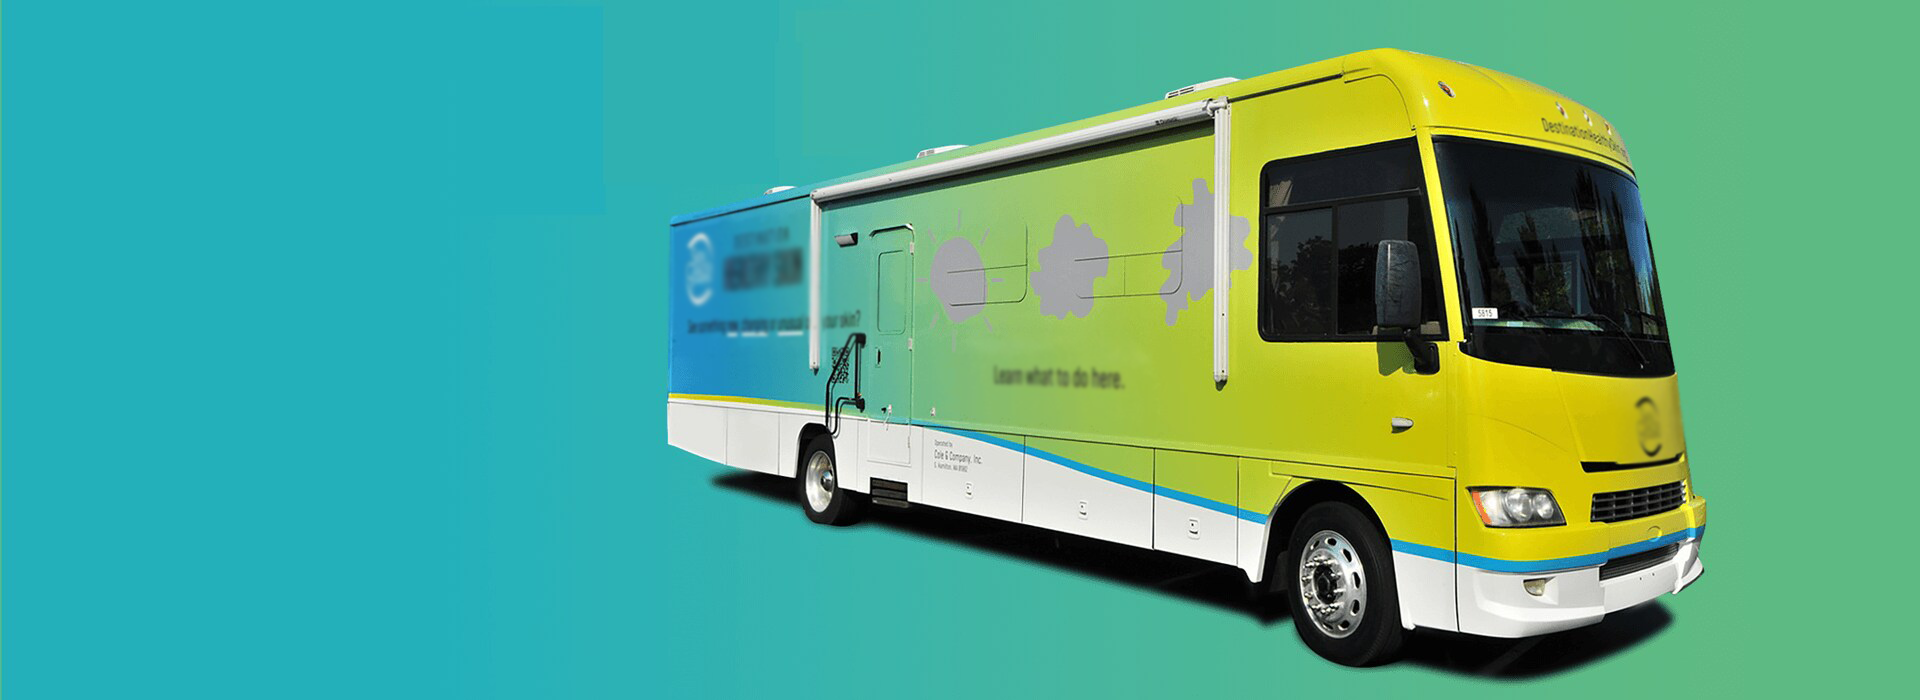 Contact - Mobile Medical Buses